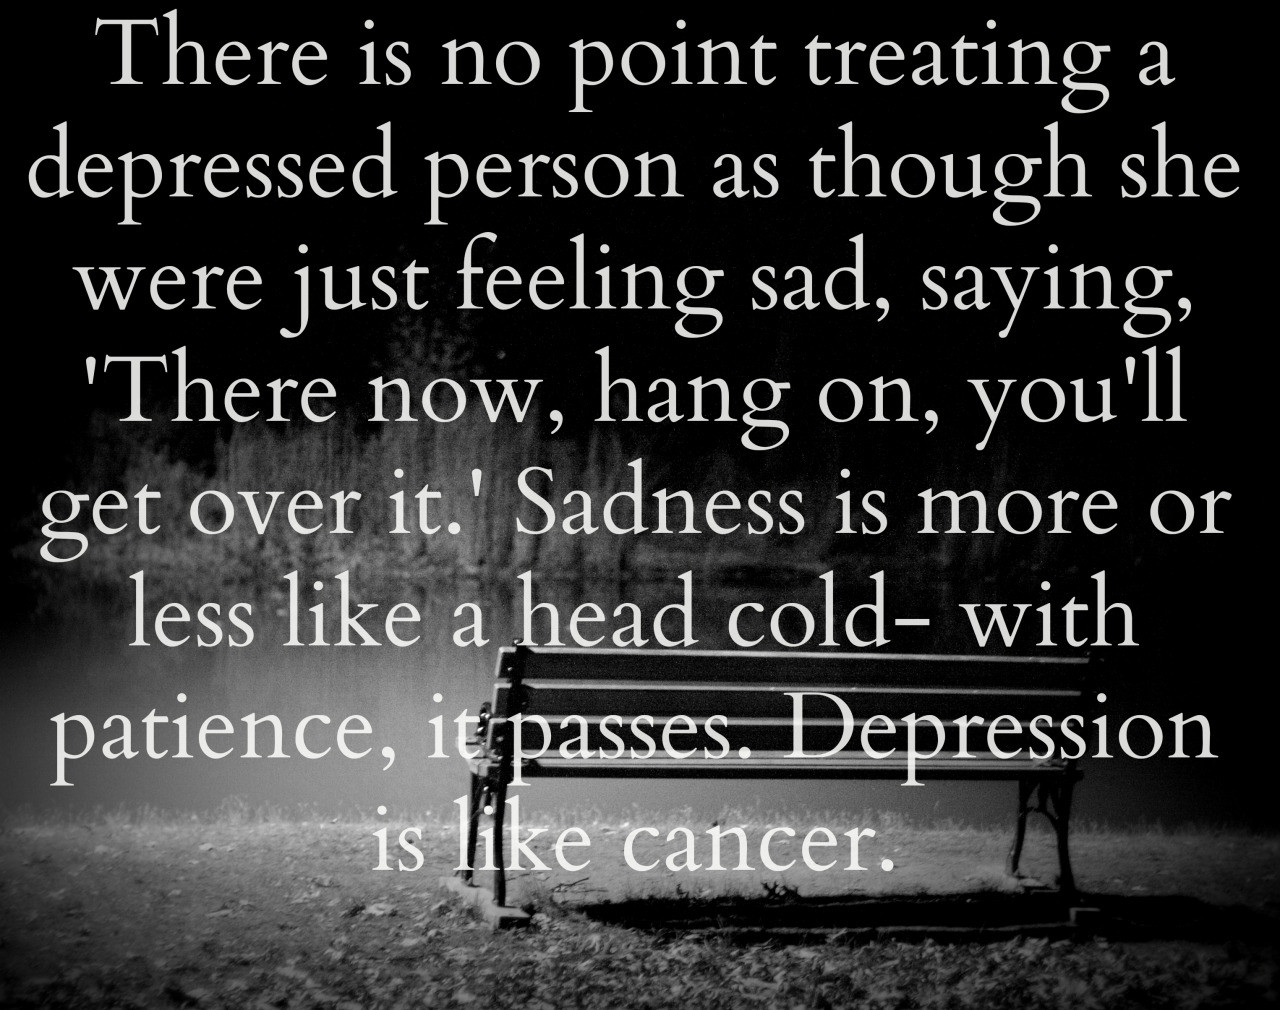 Sad Quotes About Depression
 Life As a Teen depression quotes